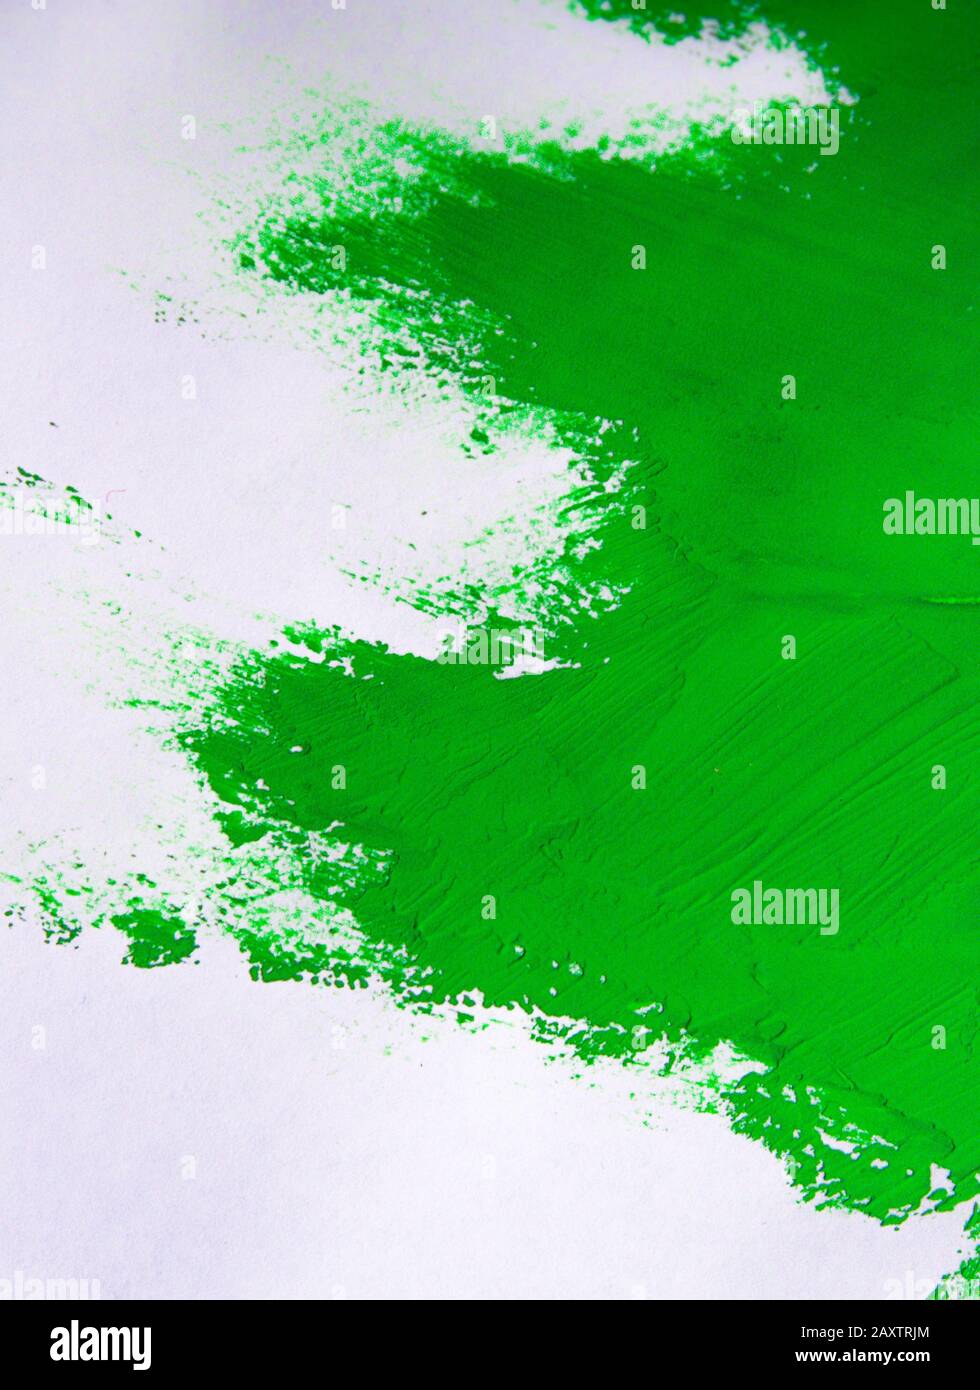 Isolated Abstract Blurred Strokes of Green Color on a White Background Stock Photo